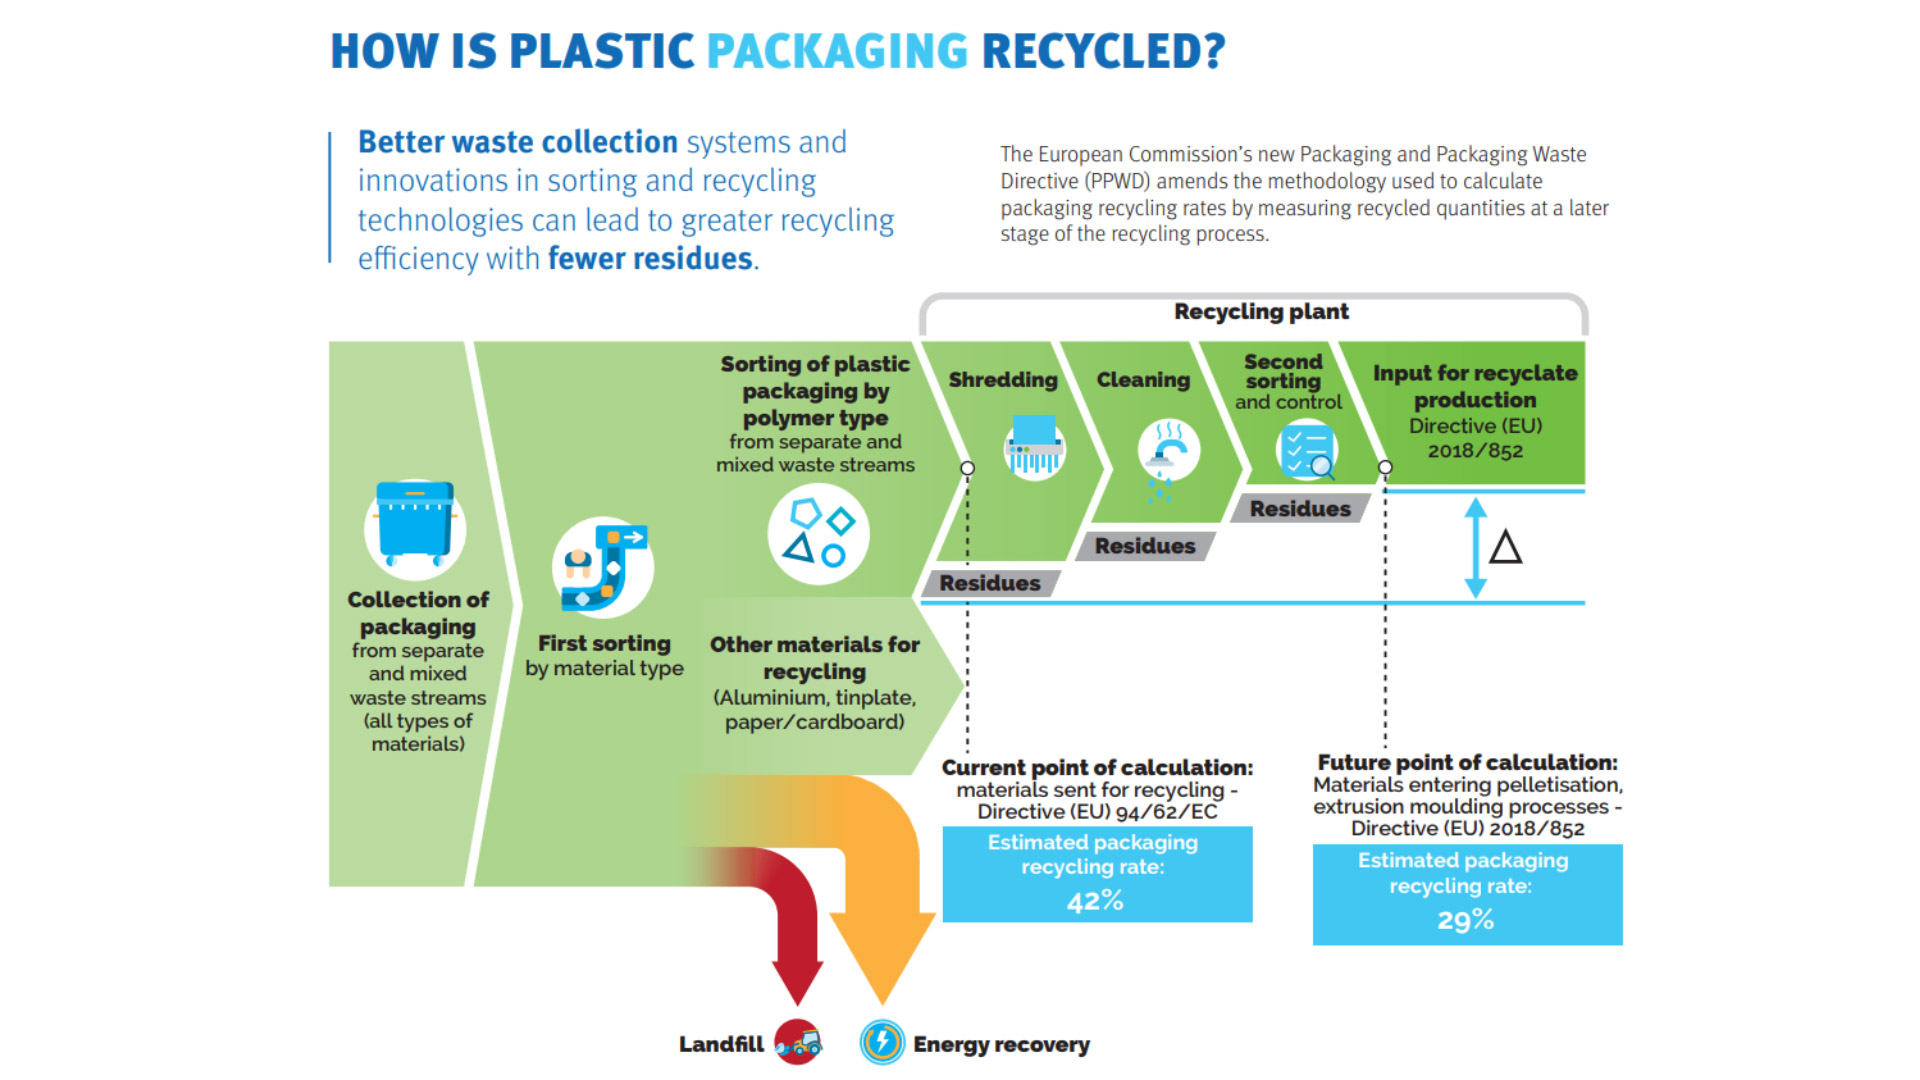 In Europe currently 42% plastic packaging waste is being recycled. This would change, however, once the new legislation focusing on modernizing the waste collection system becomes a reality (Source: Plastics Europe)